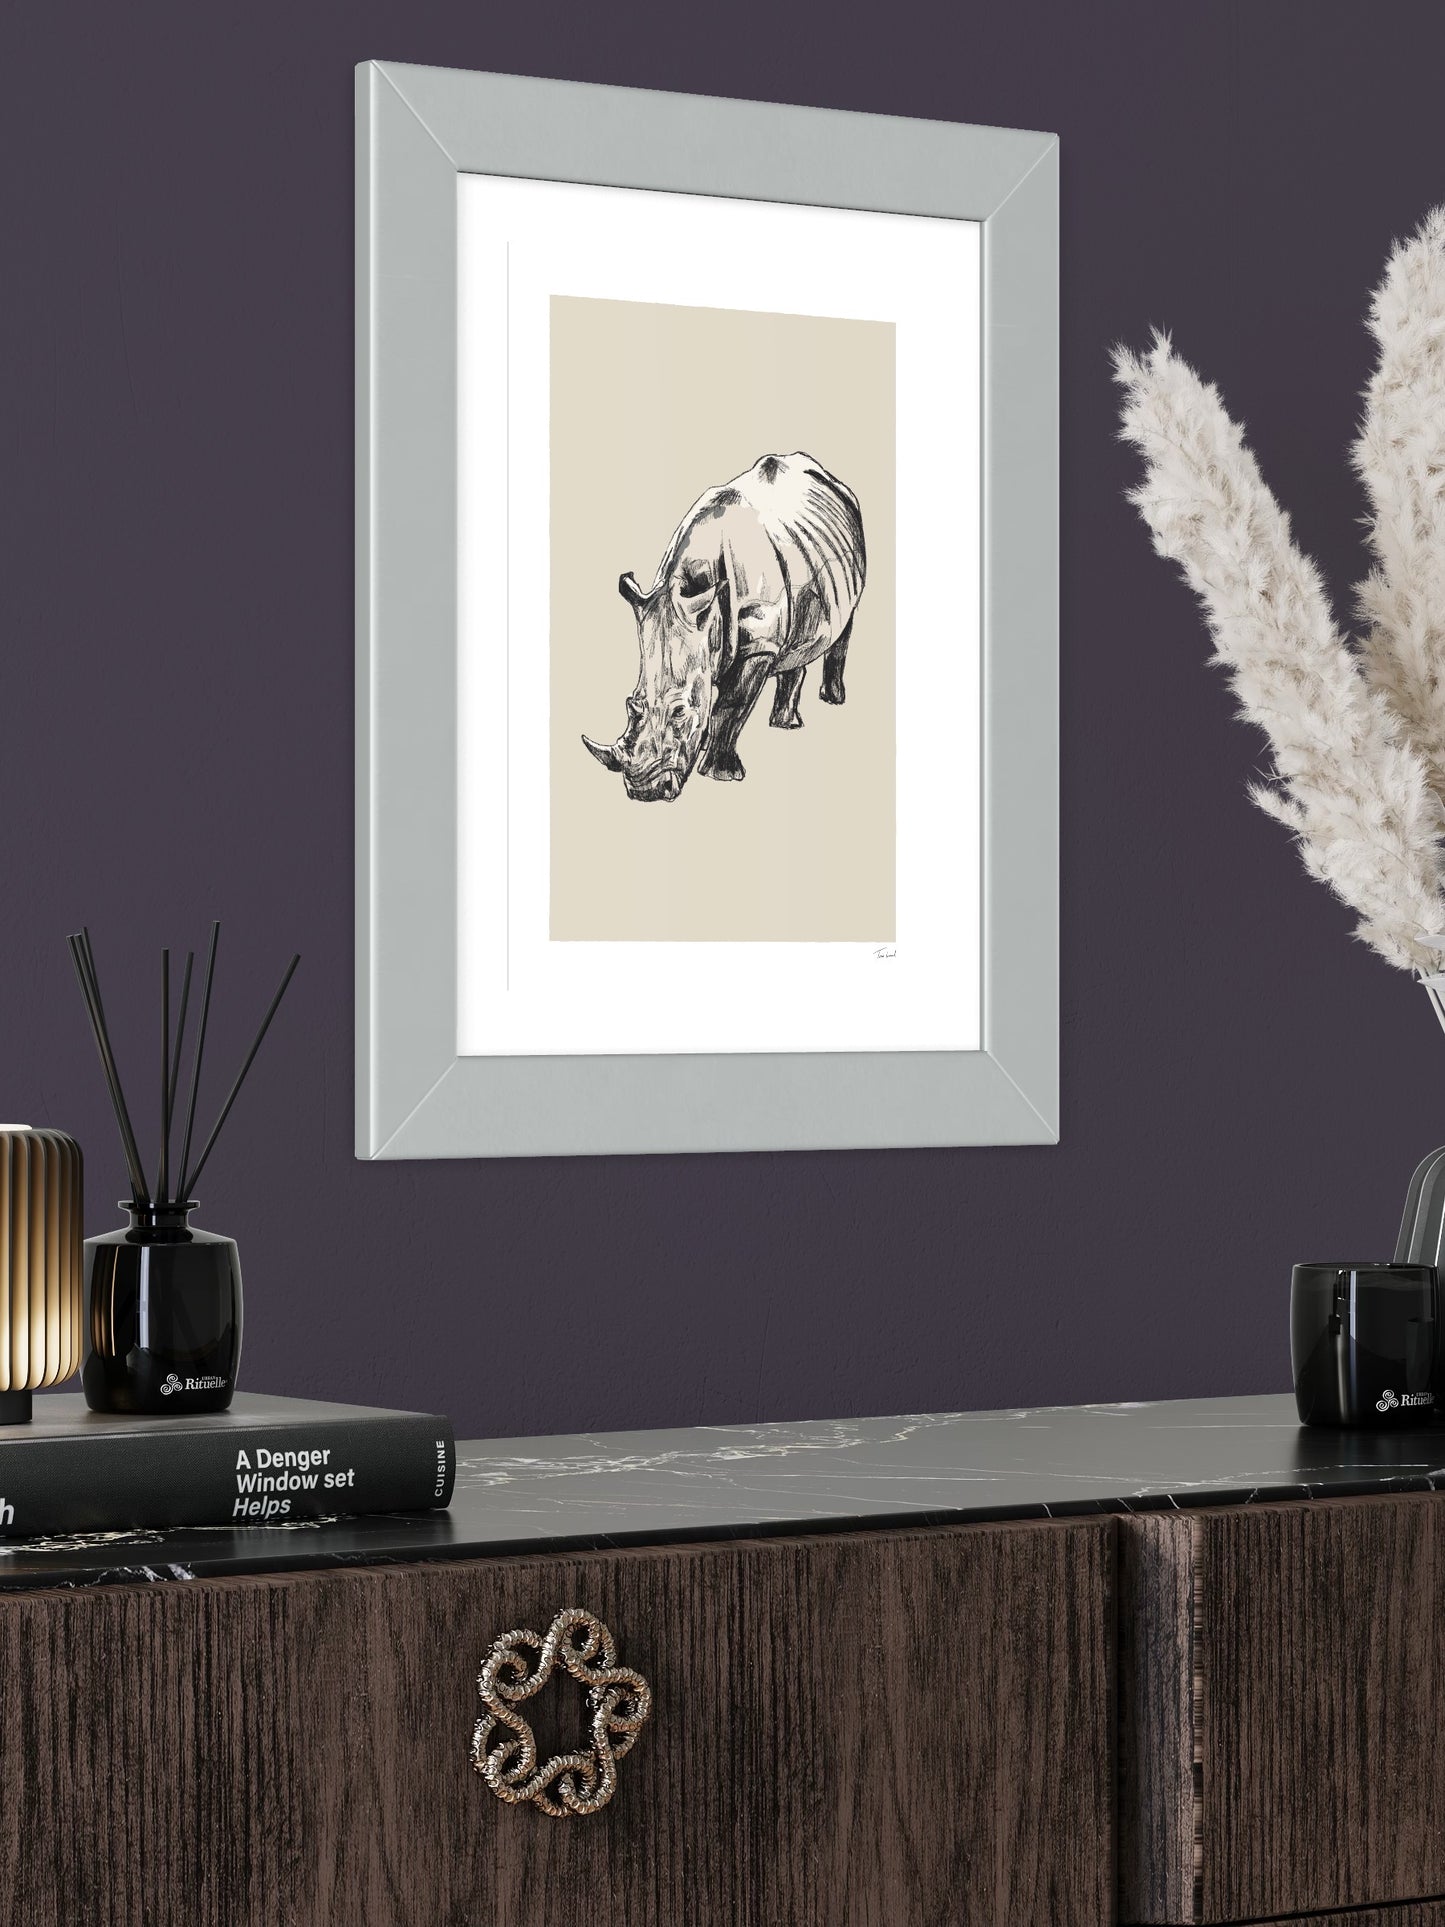 This image shows a giclee wall art print by Tom Laird Illustration of a Rhino, framed in a beautiful living room with tasteful modern home decor. This art print is available from Tom Laird Illustration in various sizes.